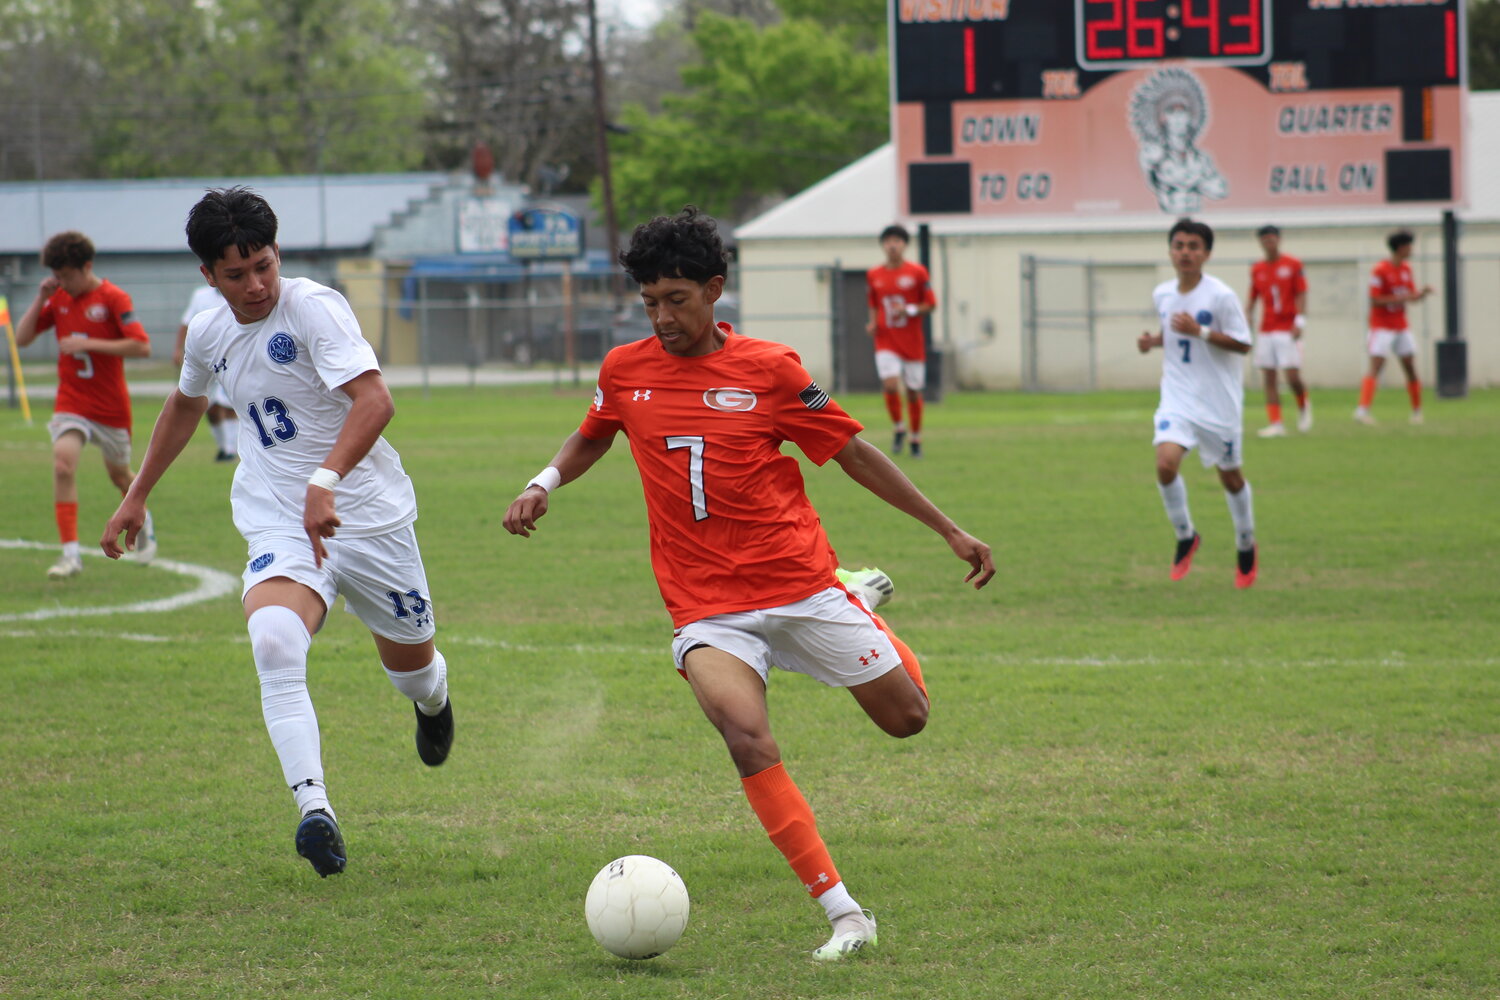 Apaches Enrique Reyna (7) and a San Antonio Memorial player chases after the soccer ball in the final match of the season.